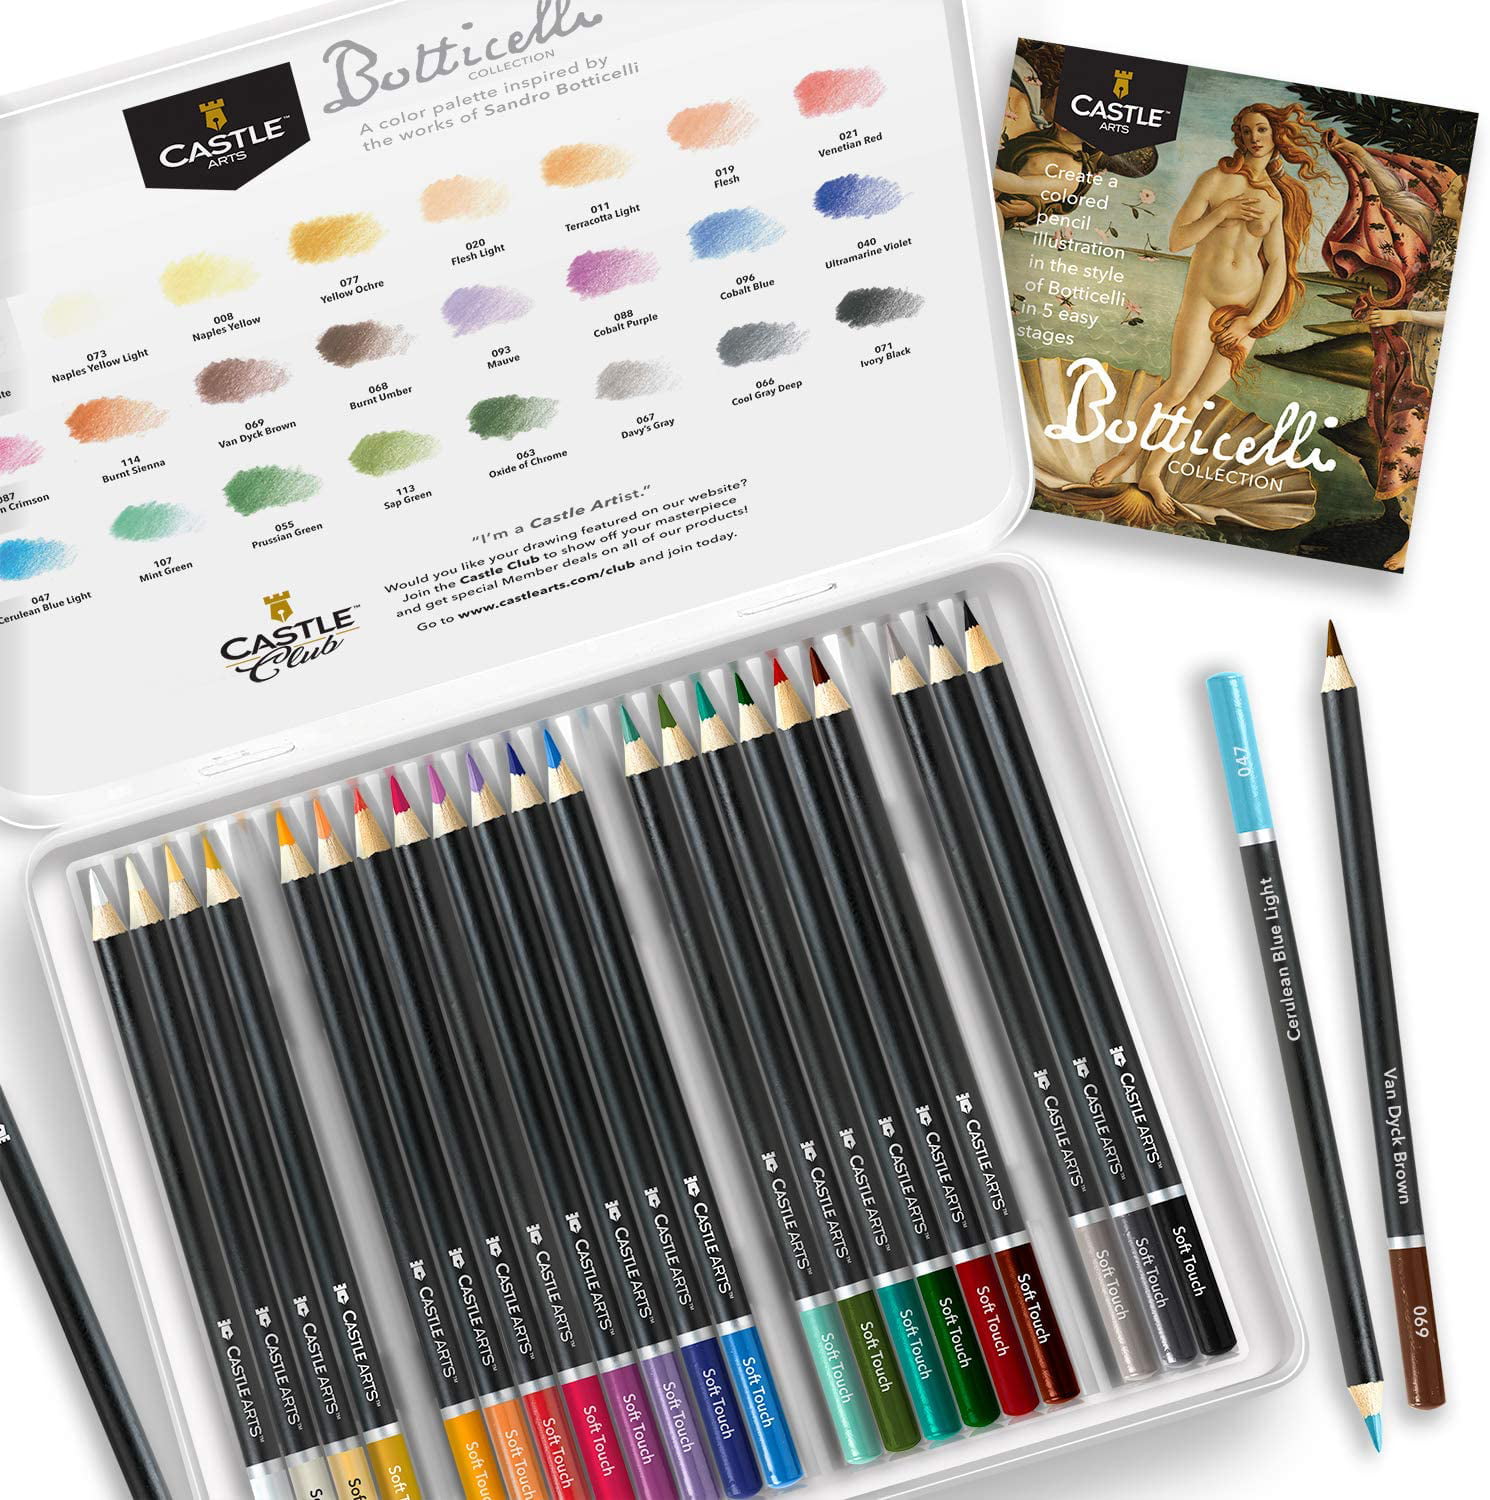 Castle Art Soft Series – The Colouring Times